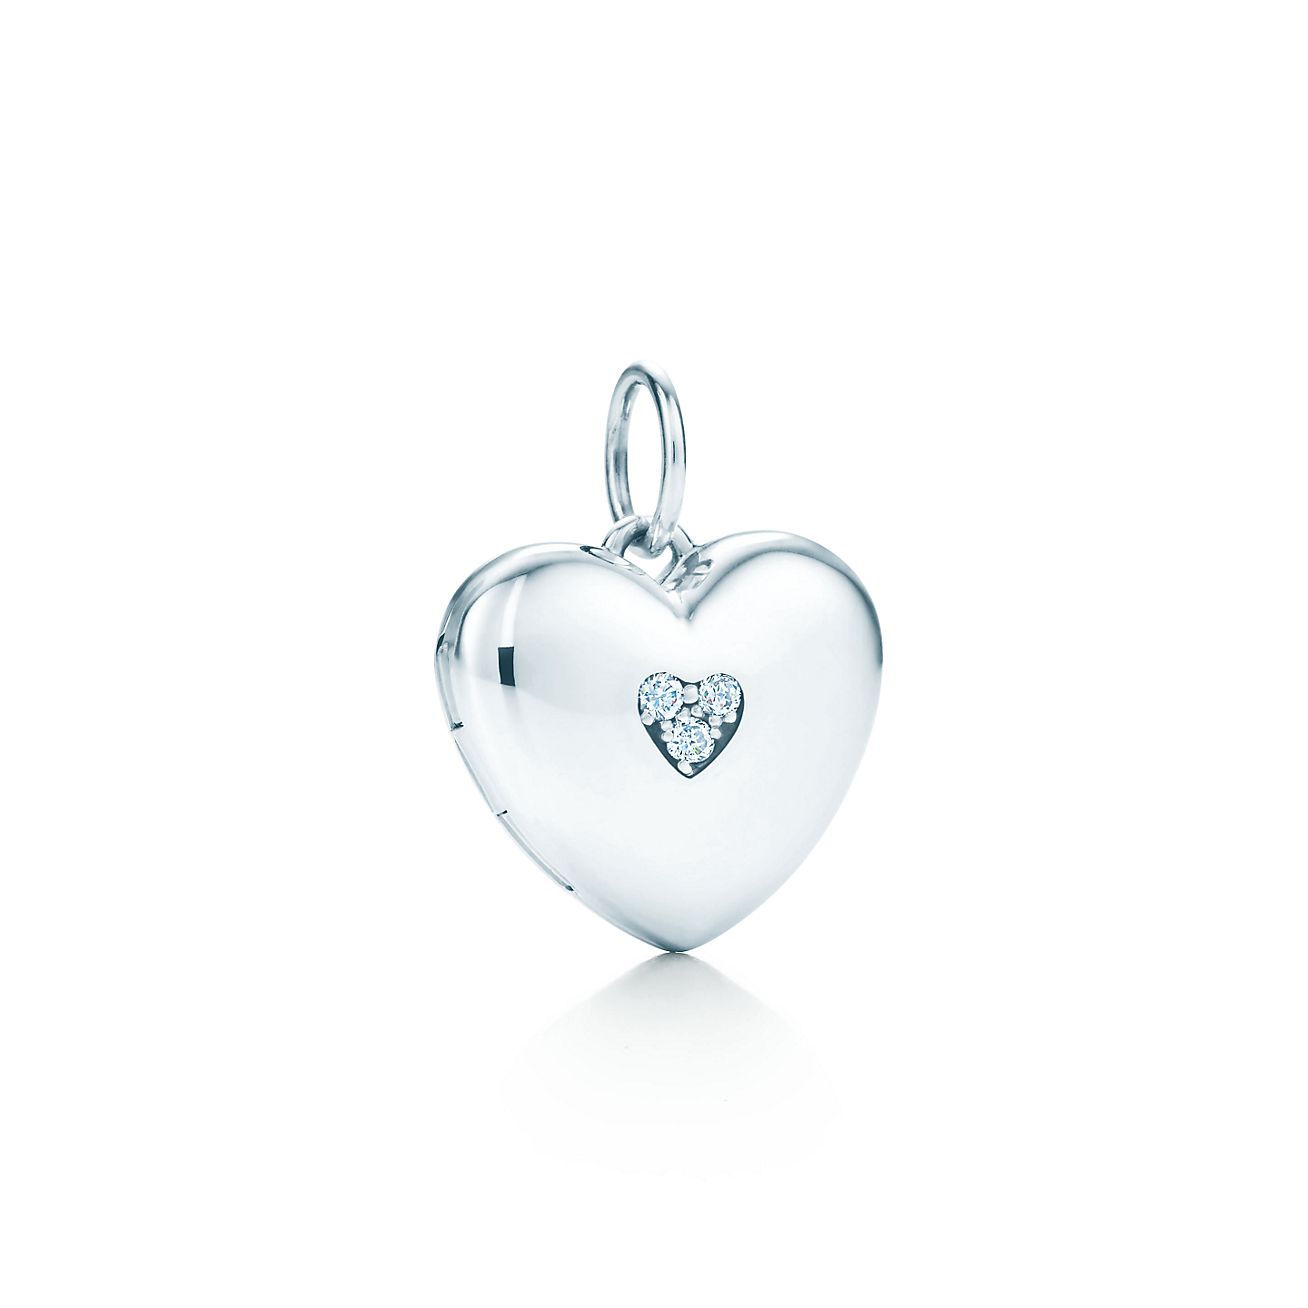 Heart locket in sterling silver with 